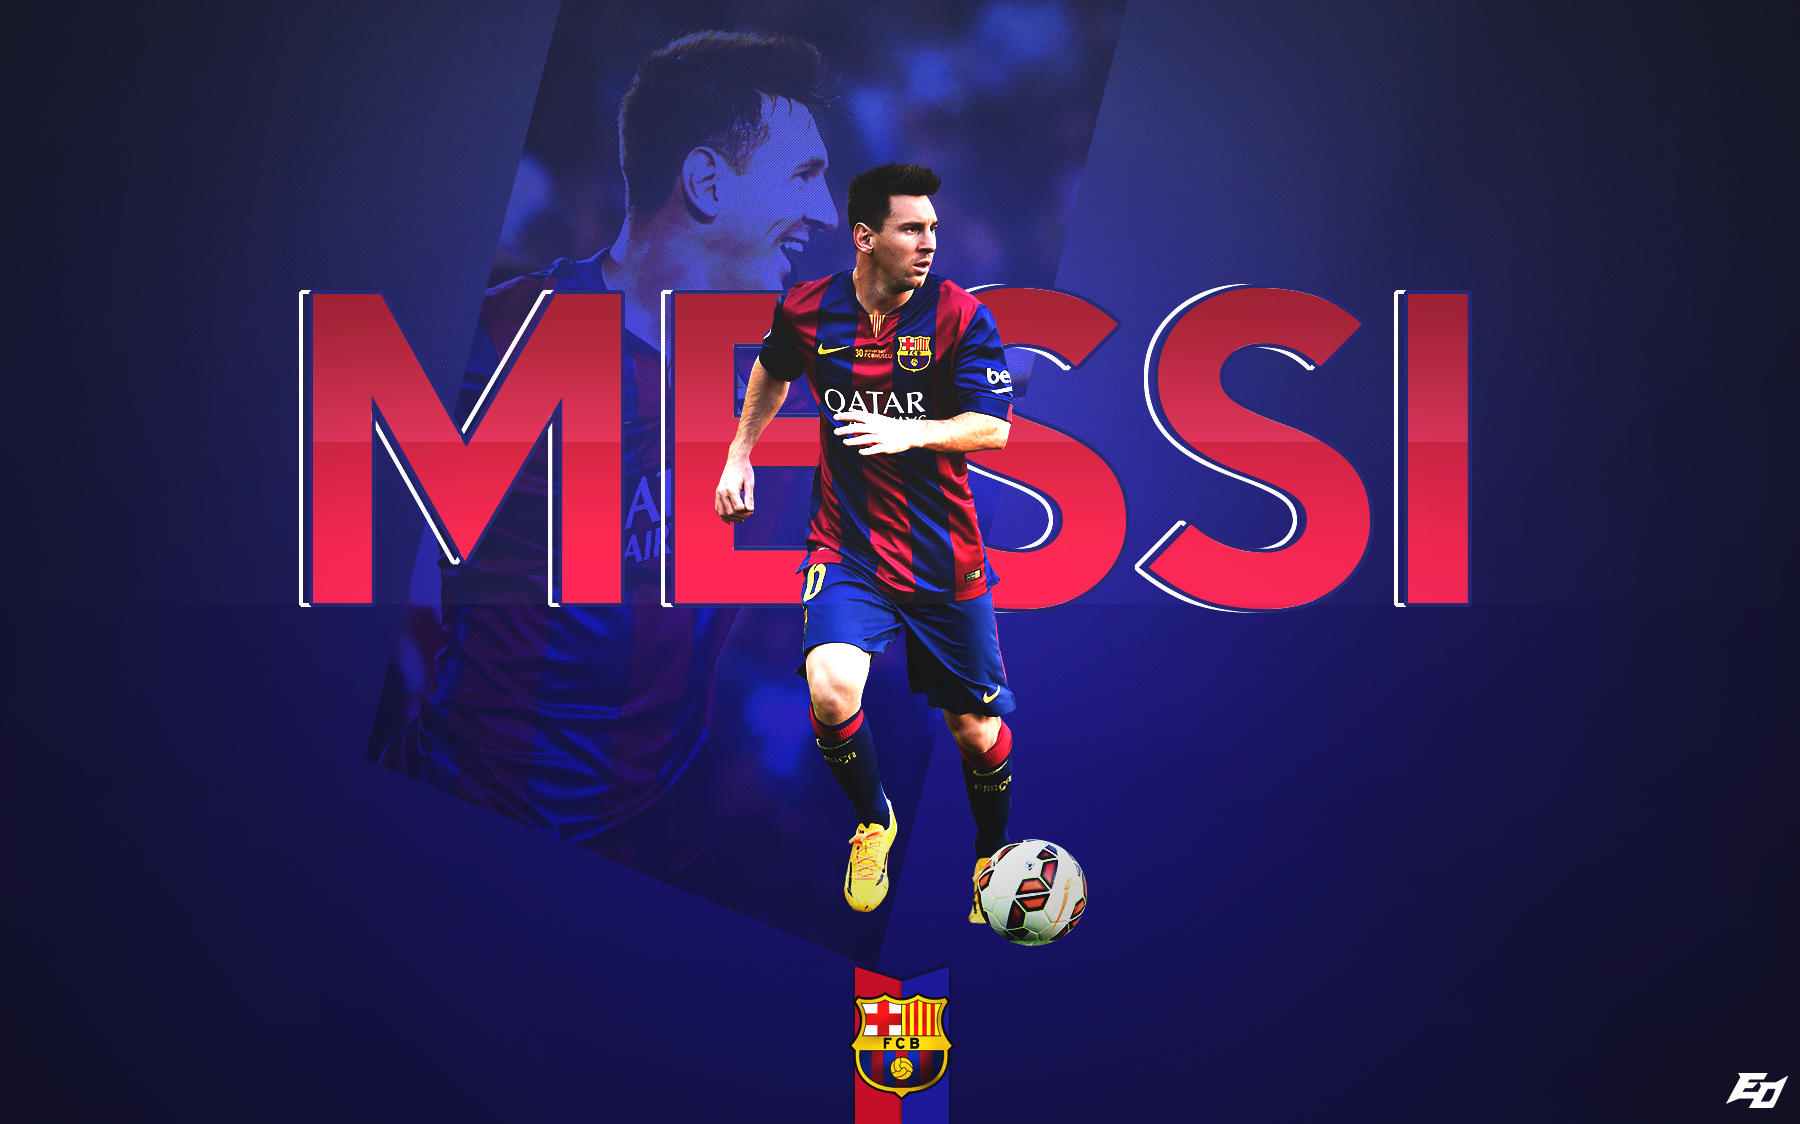 Lionel Messi Wallpapers Pictures Images